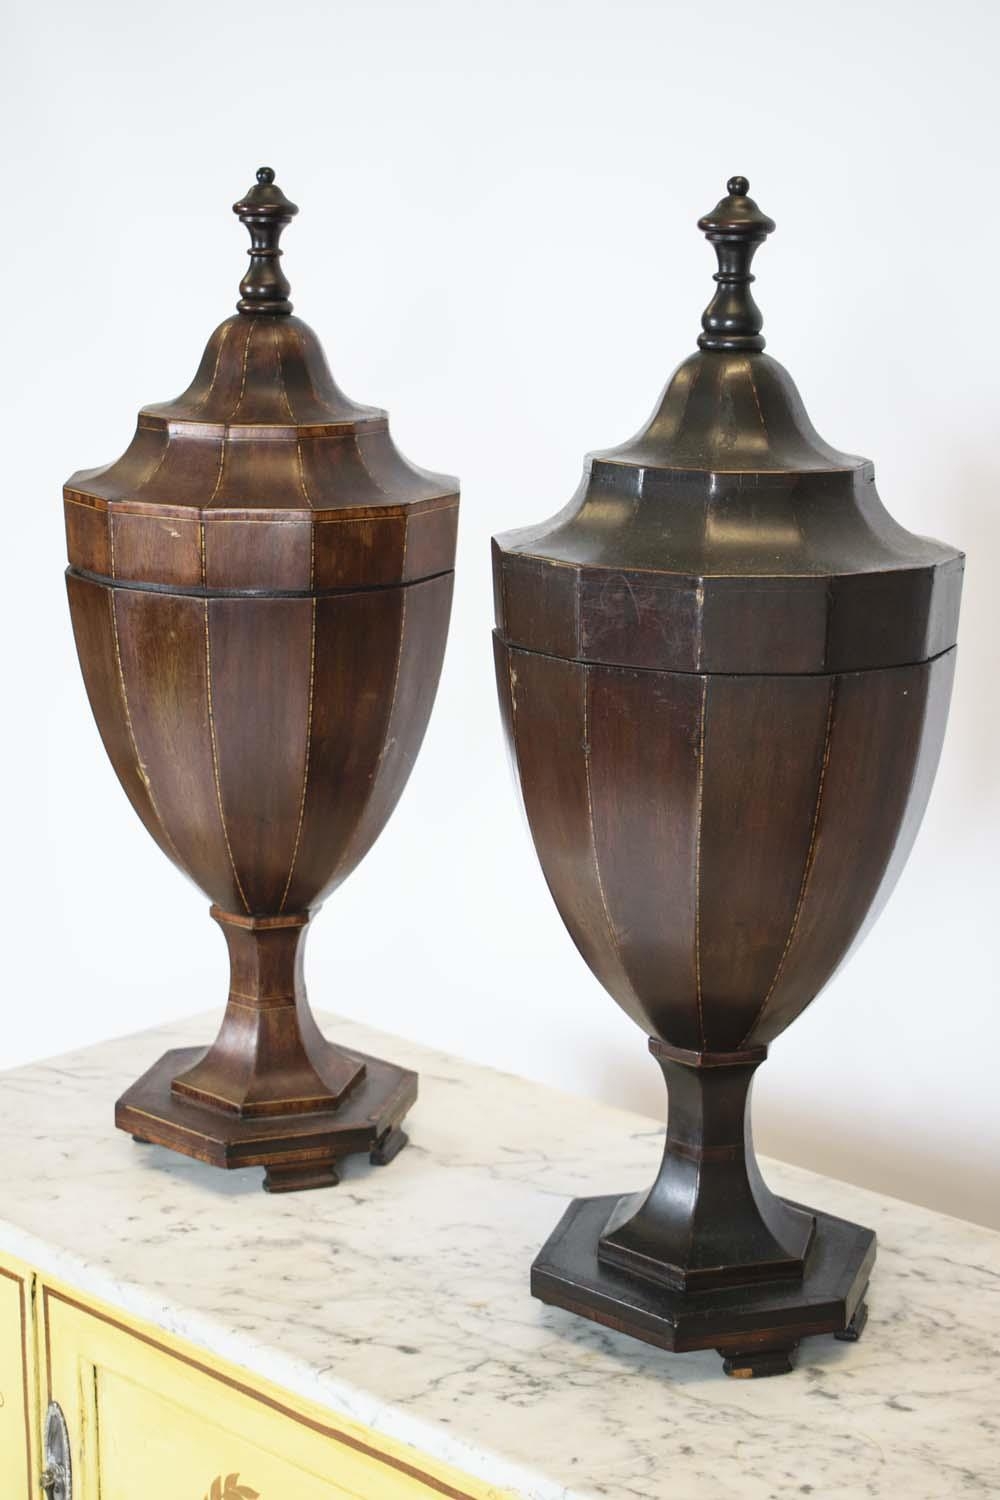 CUTLERY URNS, 68cm H x 26cm W, a pair, Sheraton design mahogany and string inlaid. (2) - Image 2 of 5